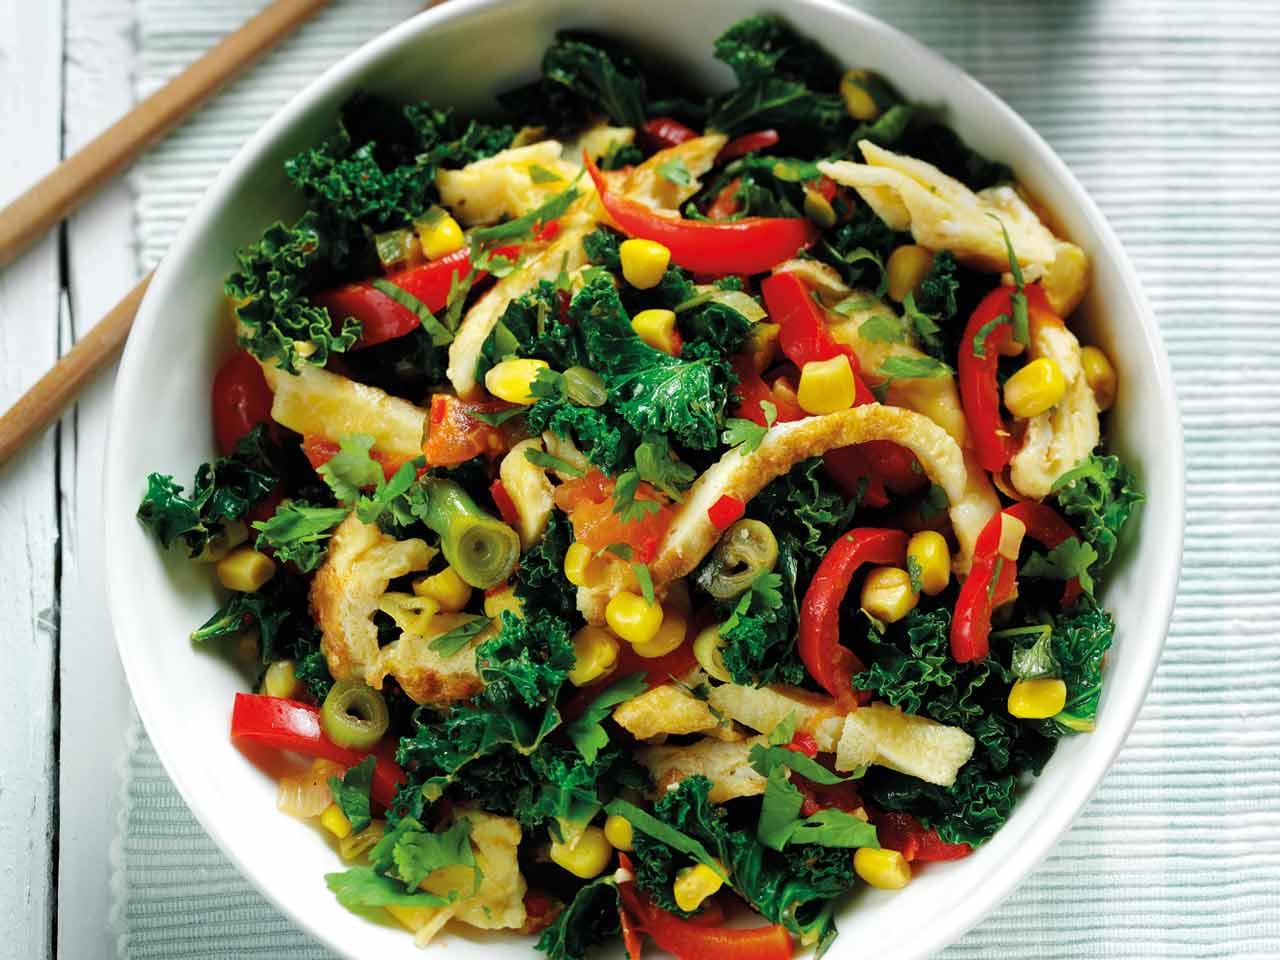 Asian chopped omelette with kale and peppers